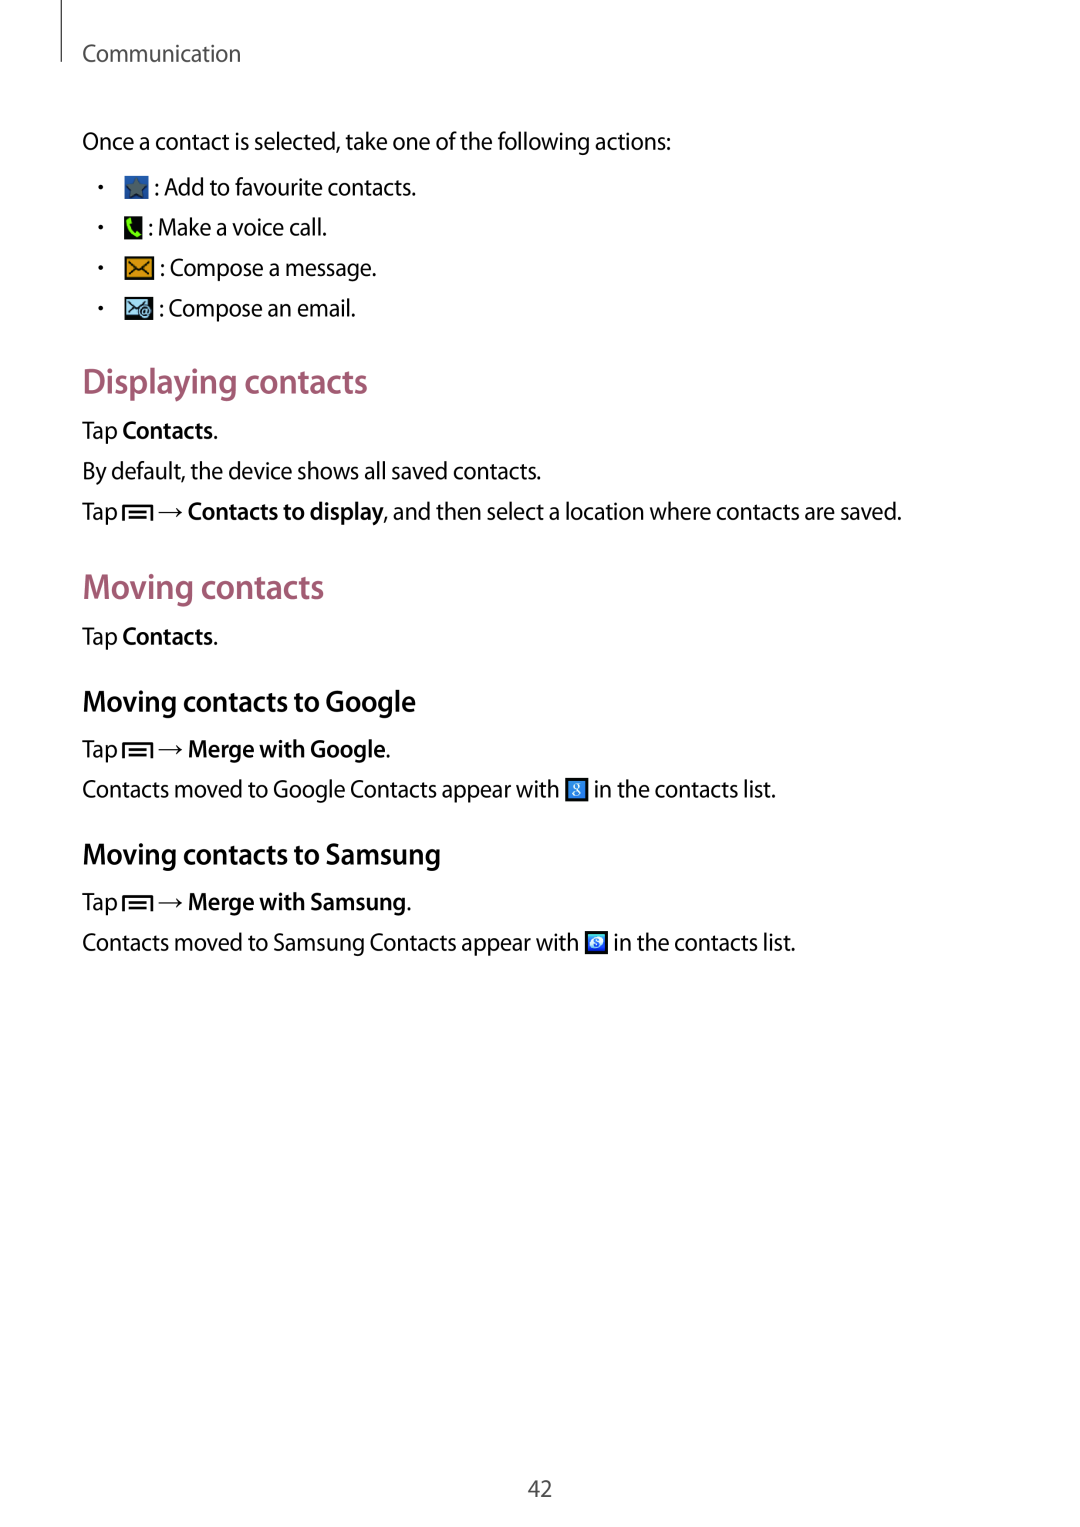 Samsung GT-S6790PWNSFR manual Displaying contacts, Moving contacts to Google, Moving contacts to Samsung, Communication 